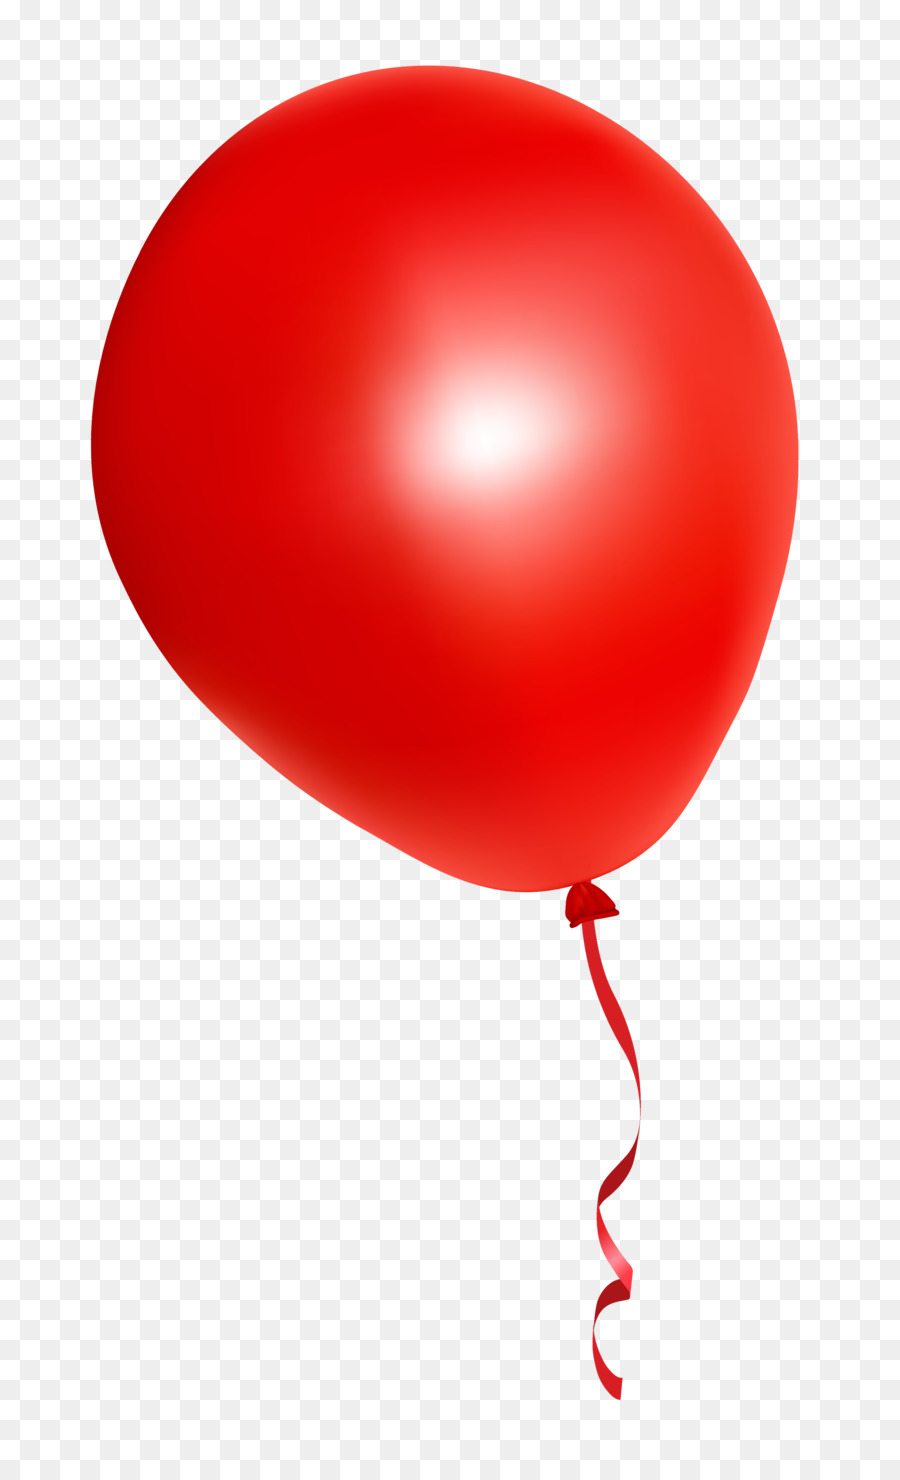 Balloon Red - Red Balloon png download - 2472*4032 - Free Transparent Balloon png Download.